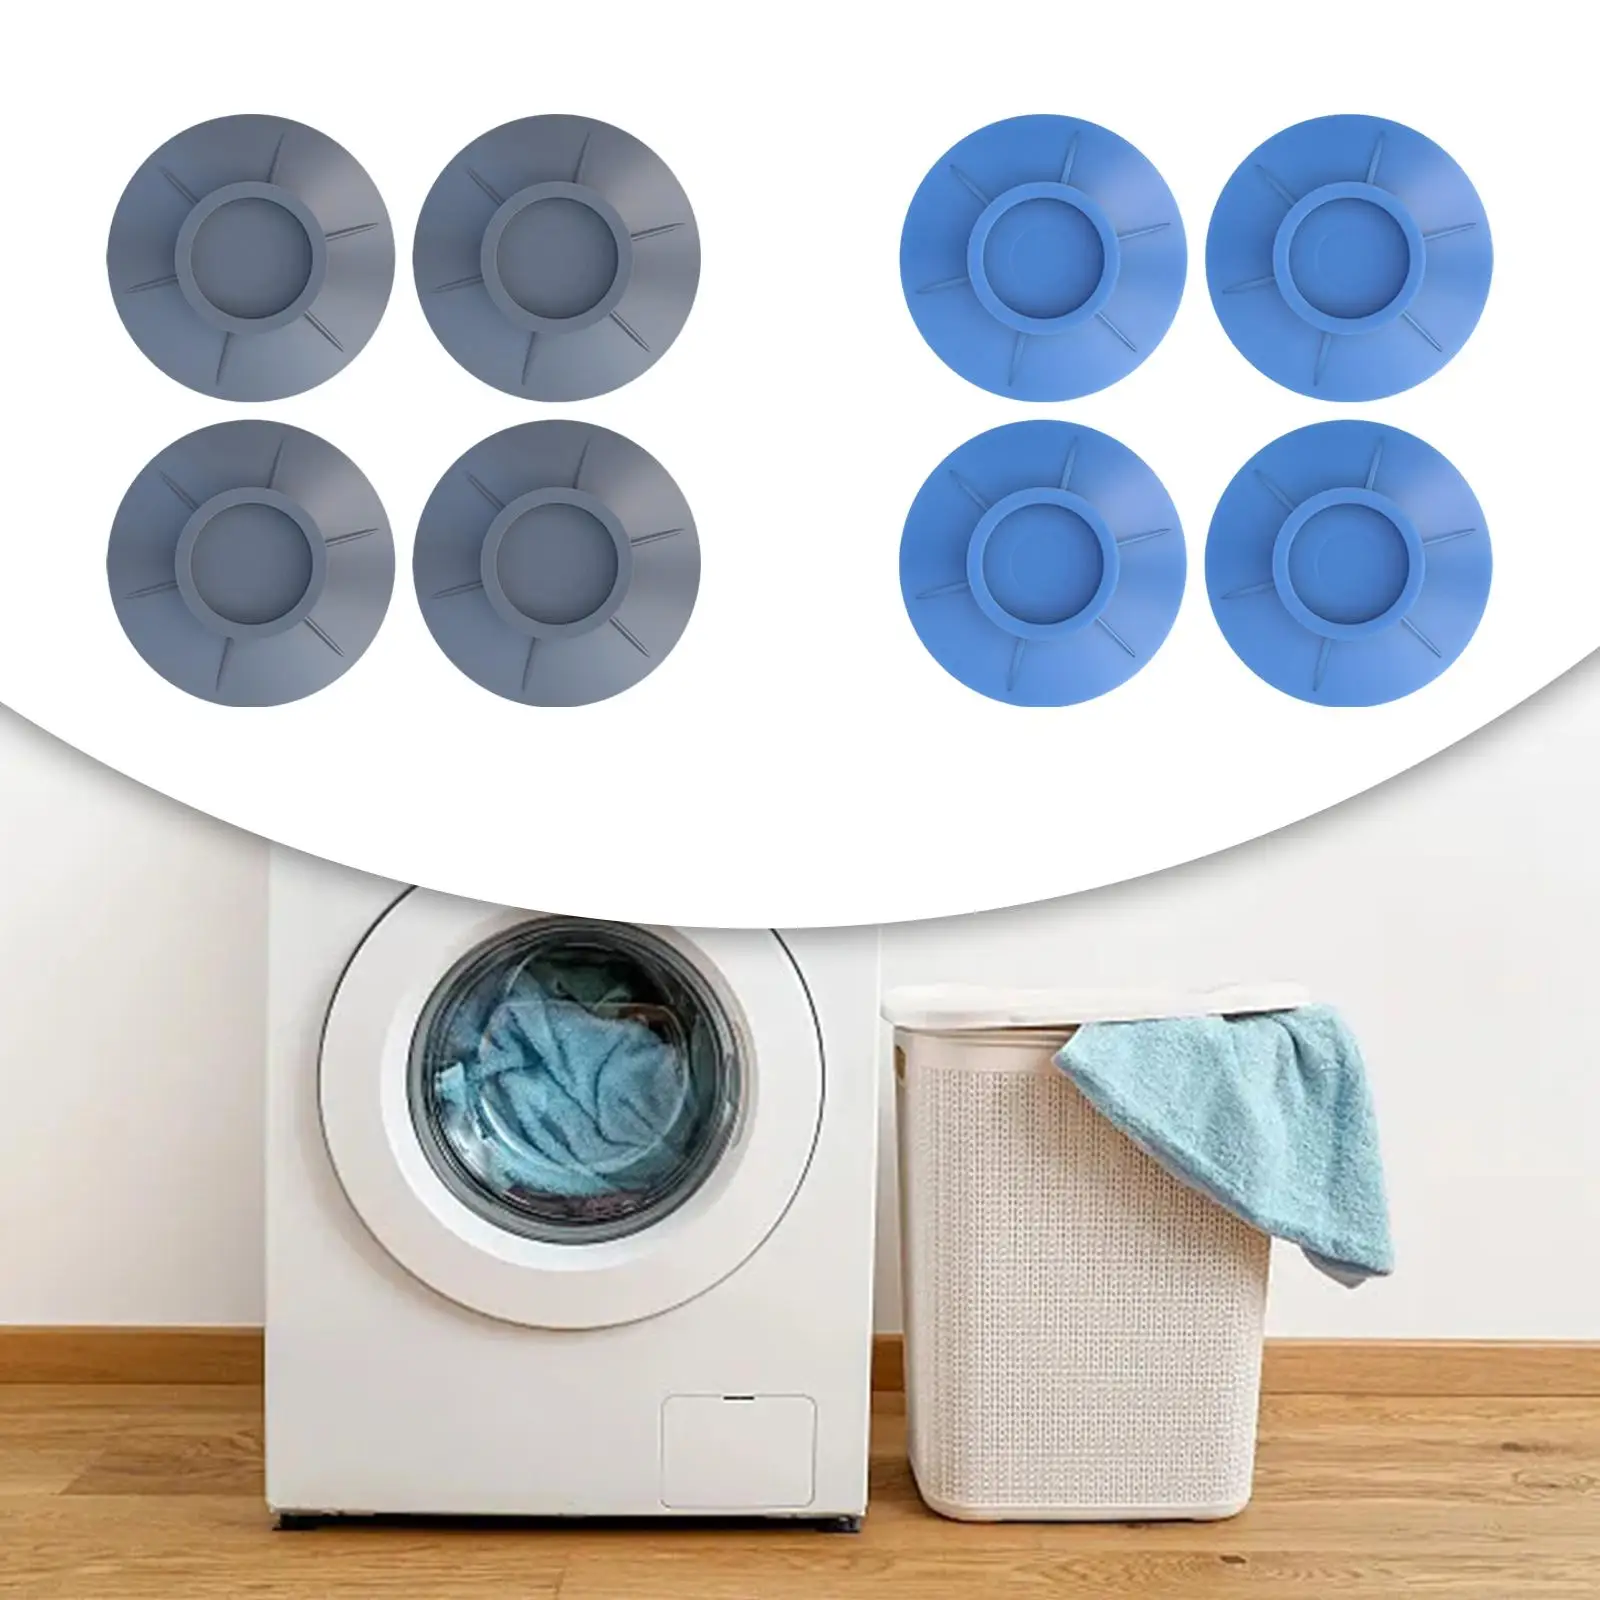 4 Pieces Washing Machine Floor Mat Shockproof for Home Furniture Appliances